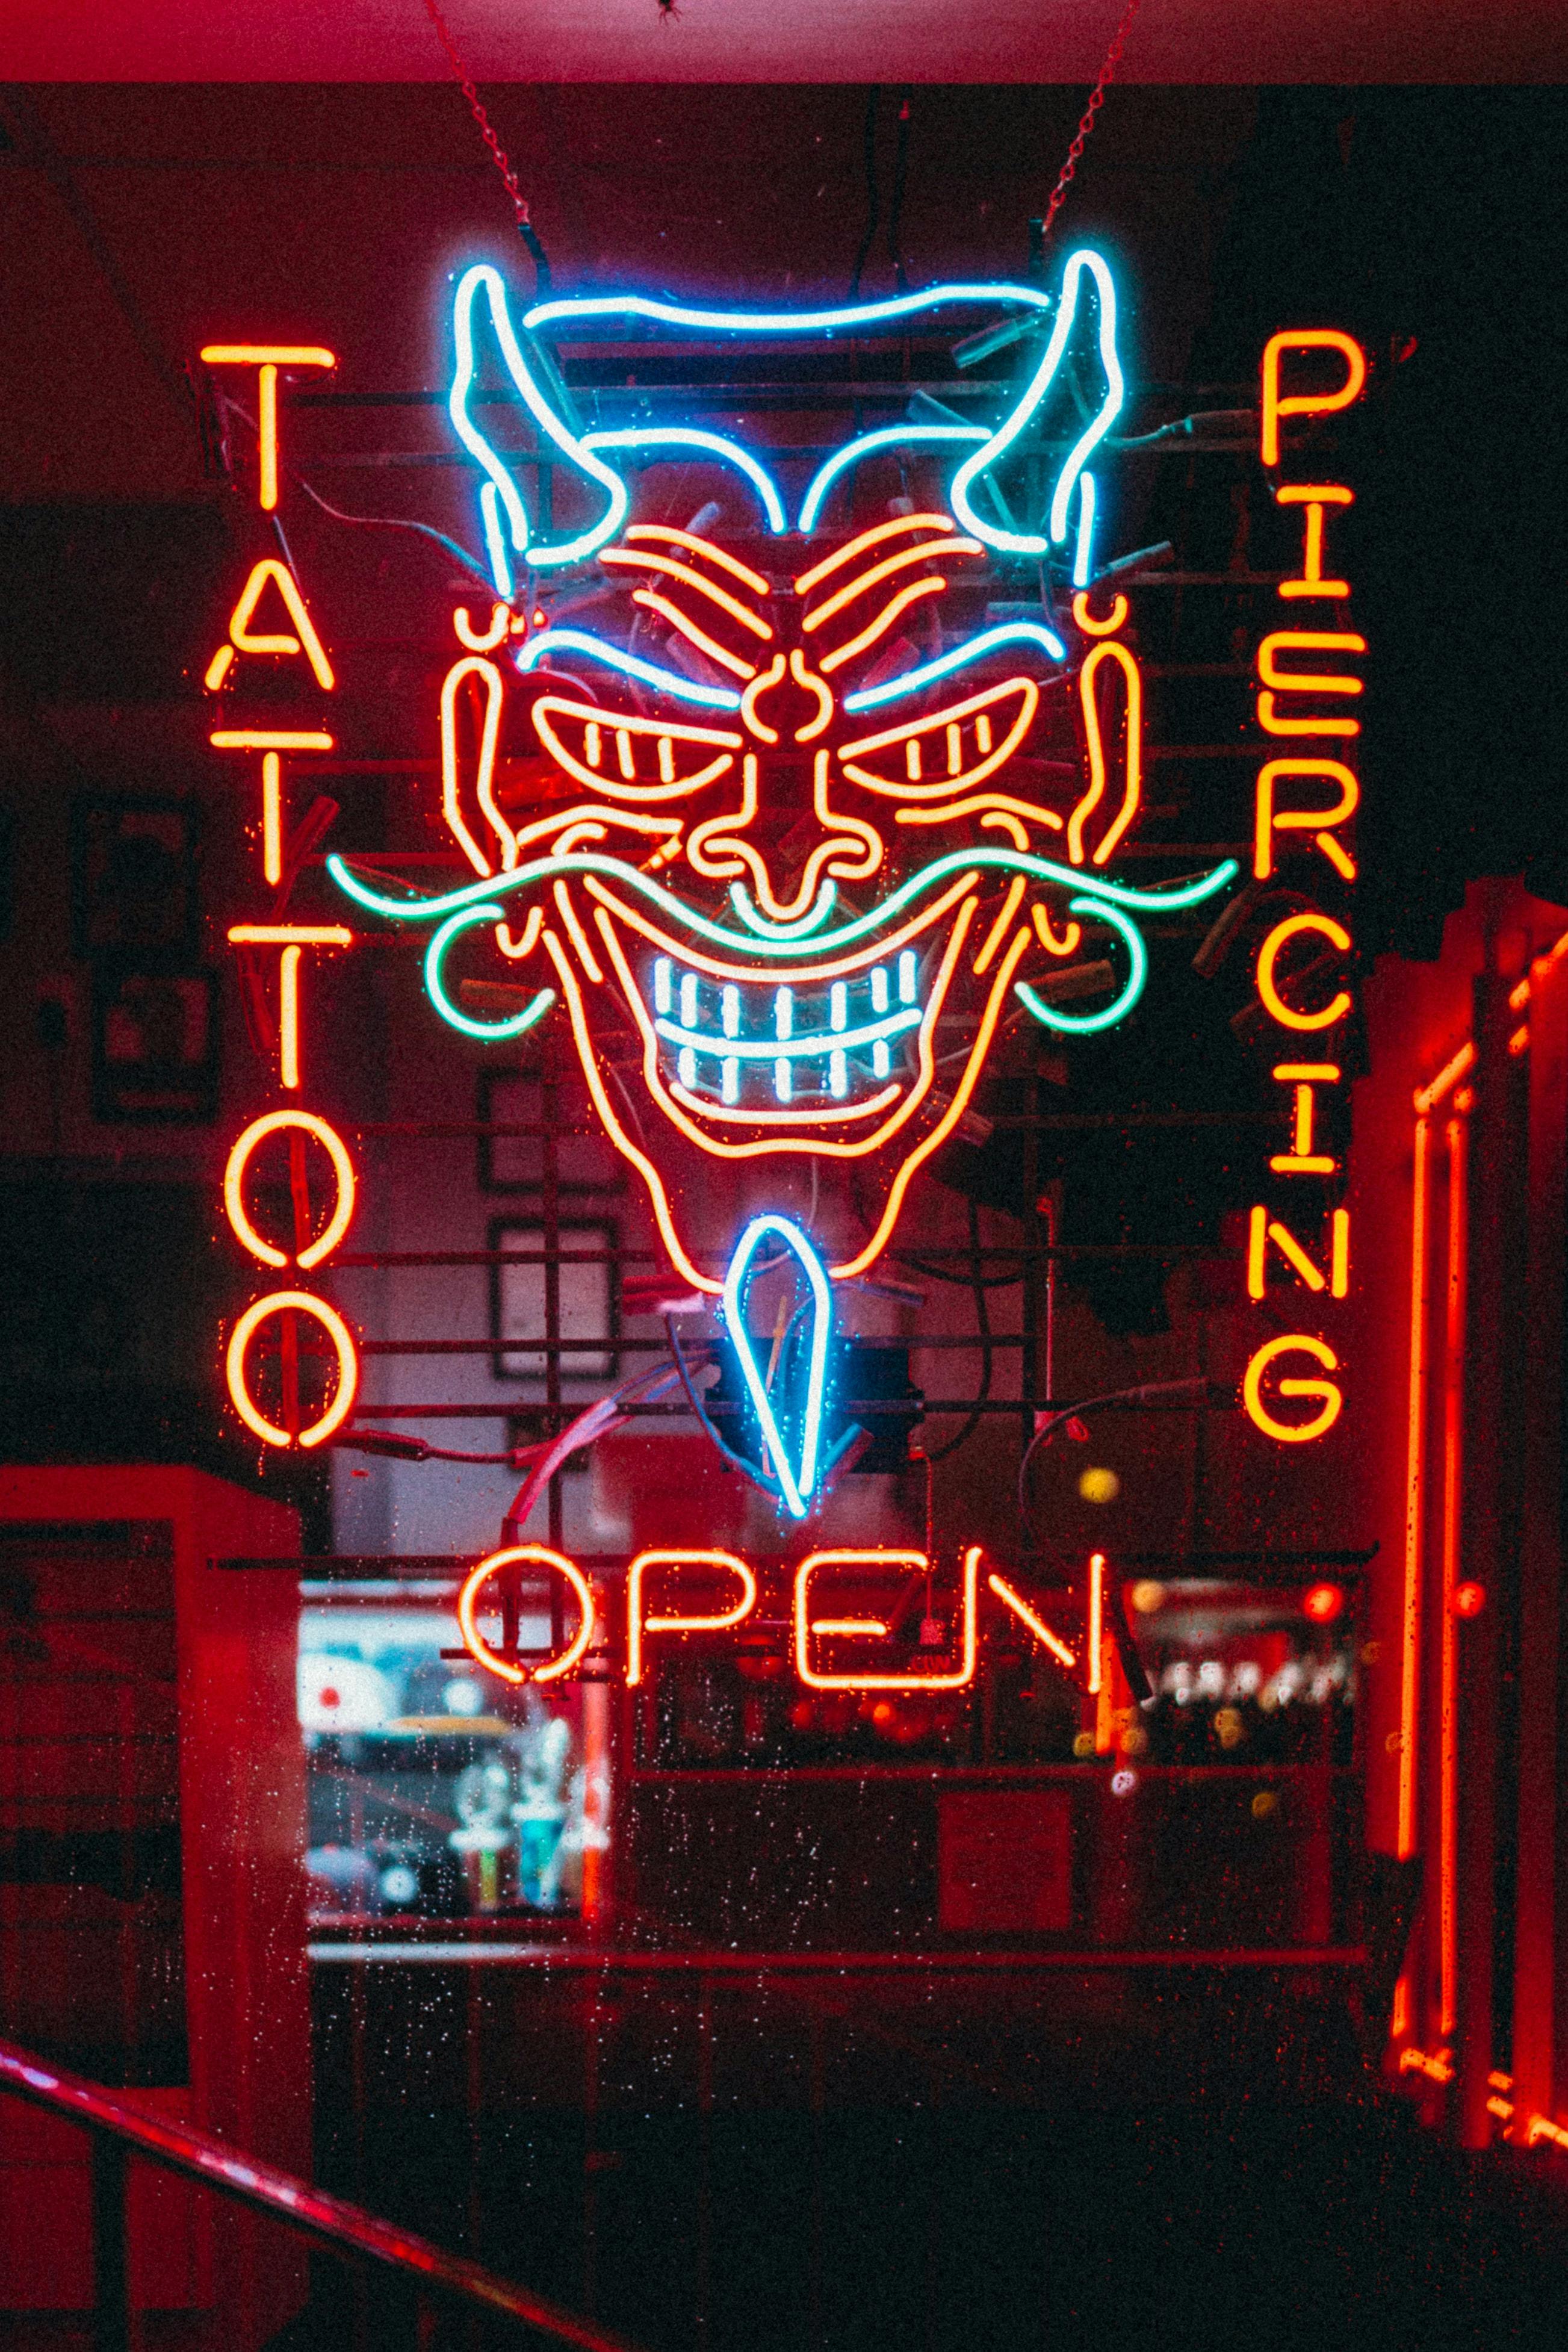 Tattoo and Piercing Neon Sign at Night  Free Stock Photo